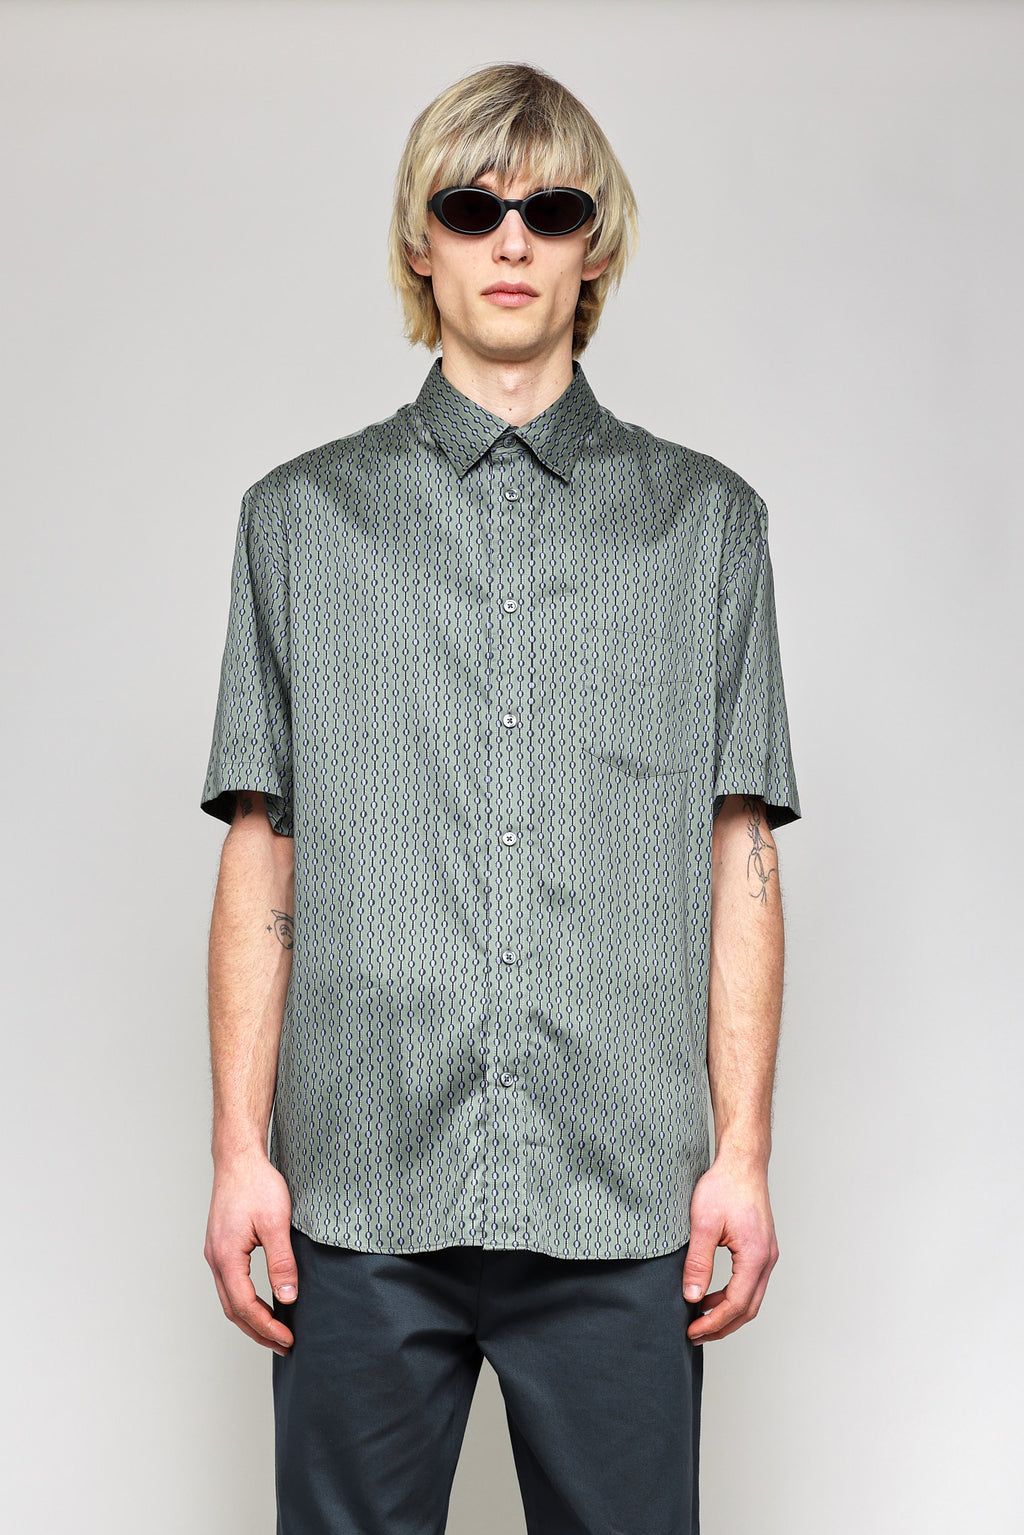 Japanese Dotted Stripe Print in Green 01